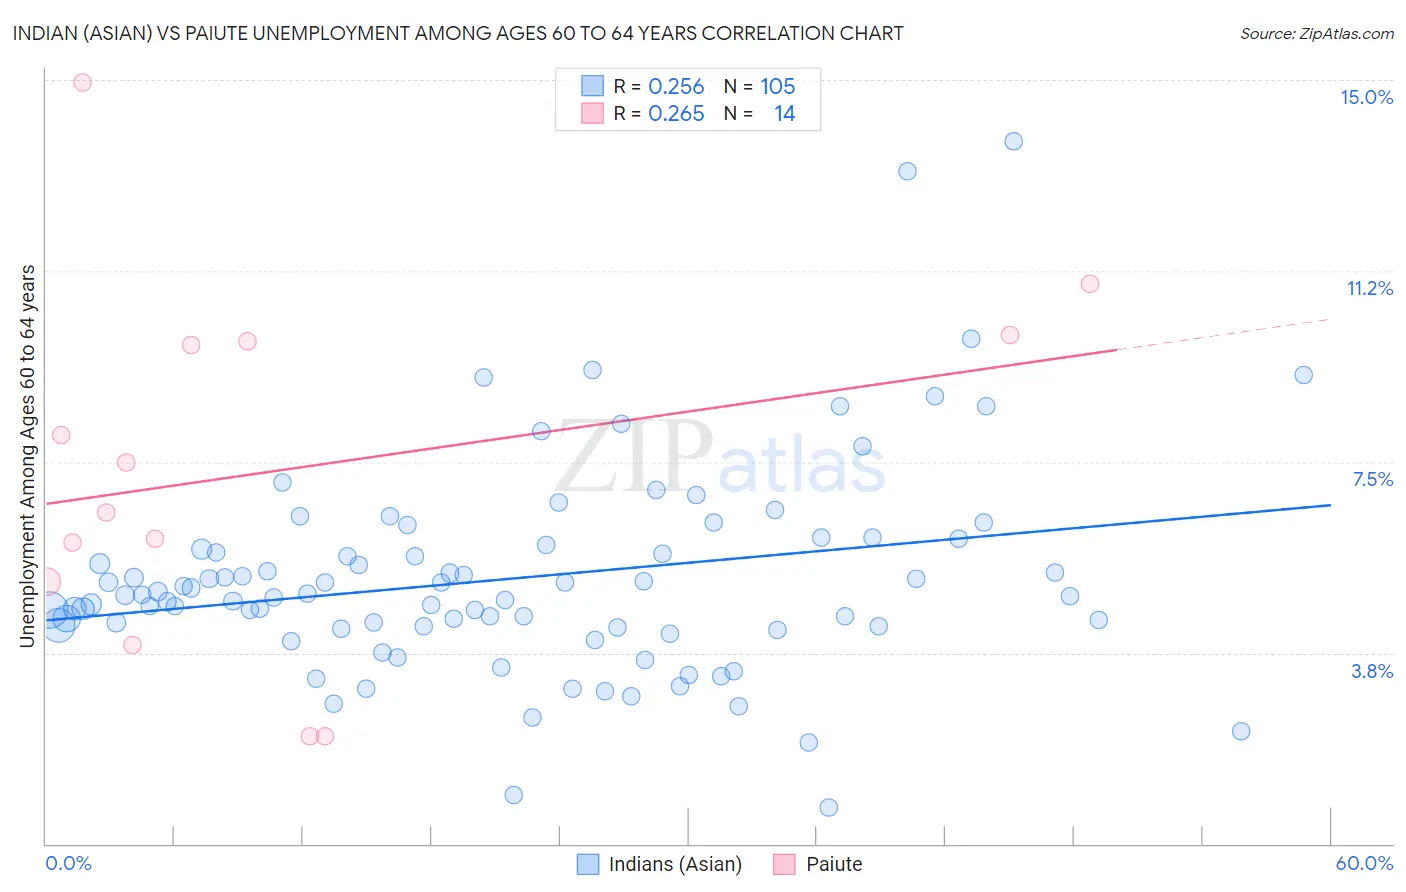 Indian (Asian) vs Paiute Unemployment Among Ages 60 to 64 years